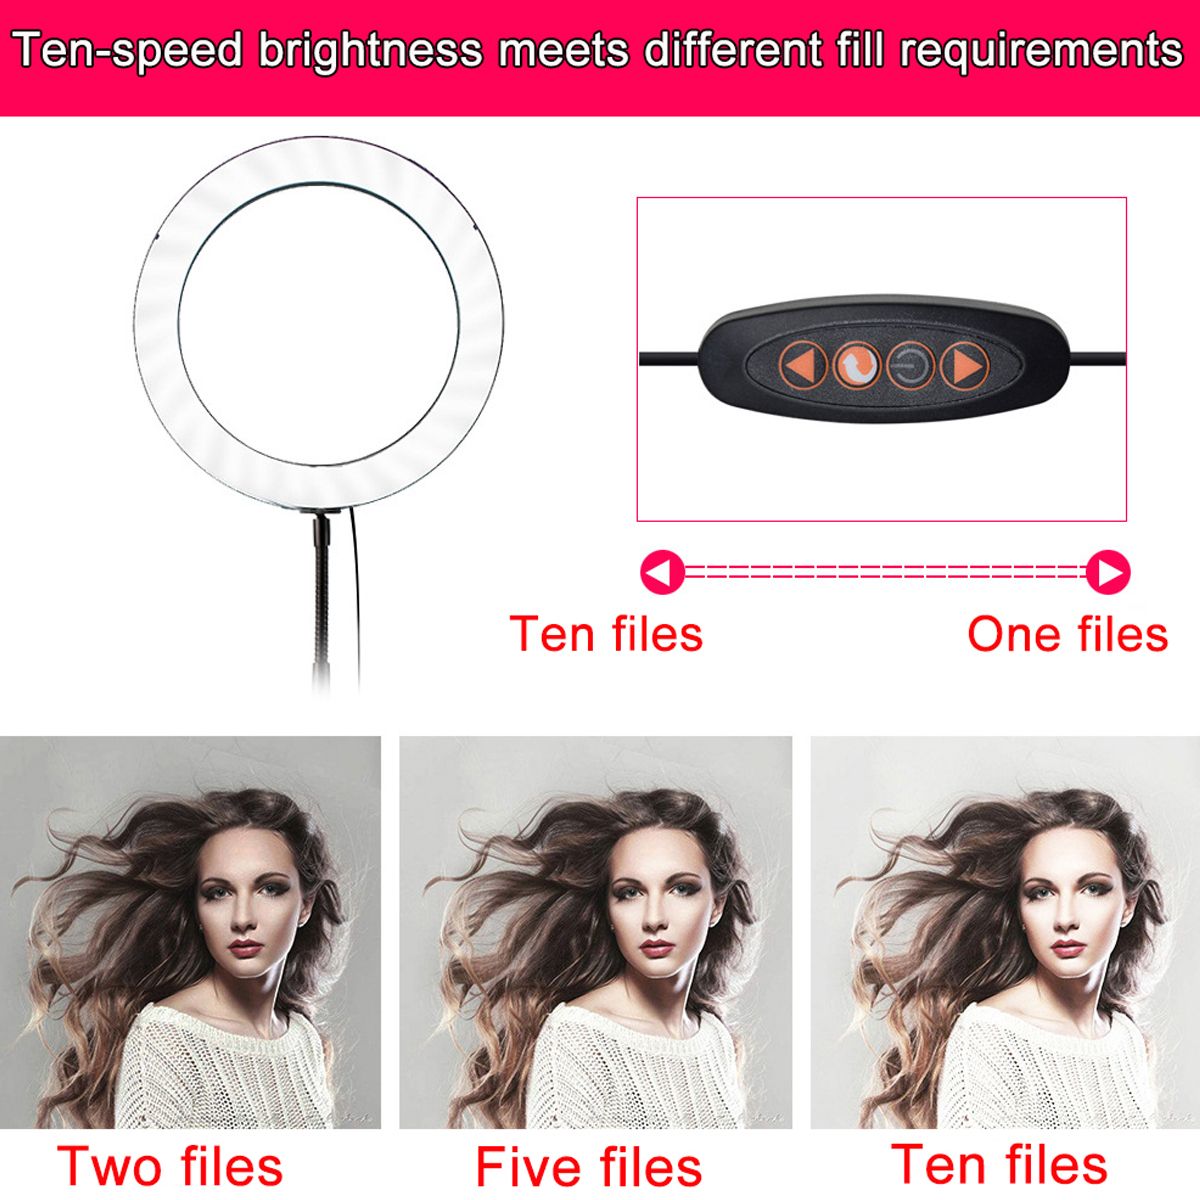 87126-Inch-LED-Dimmable-Video-Ring-Light-Tripod-Stand-with-Mirror-2-Phone-Clip-for-Youtube-Tik-Tok-M-1610612